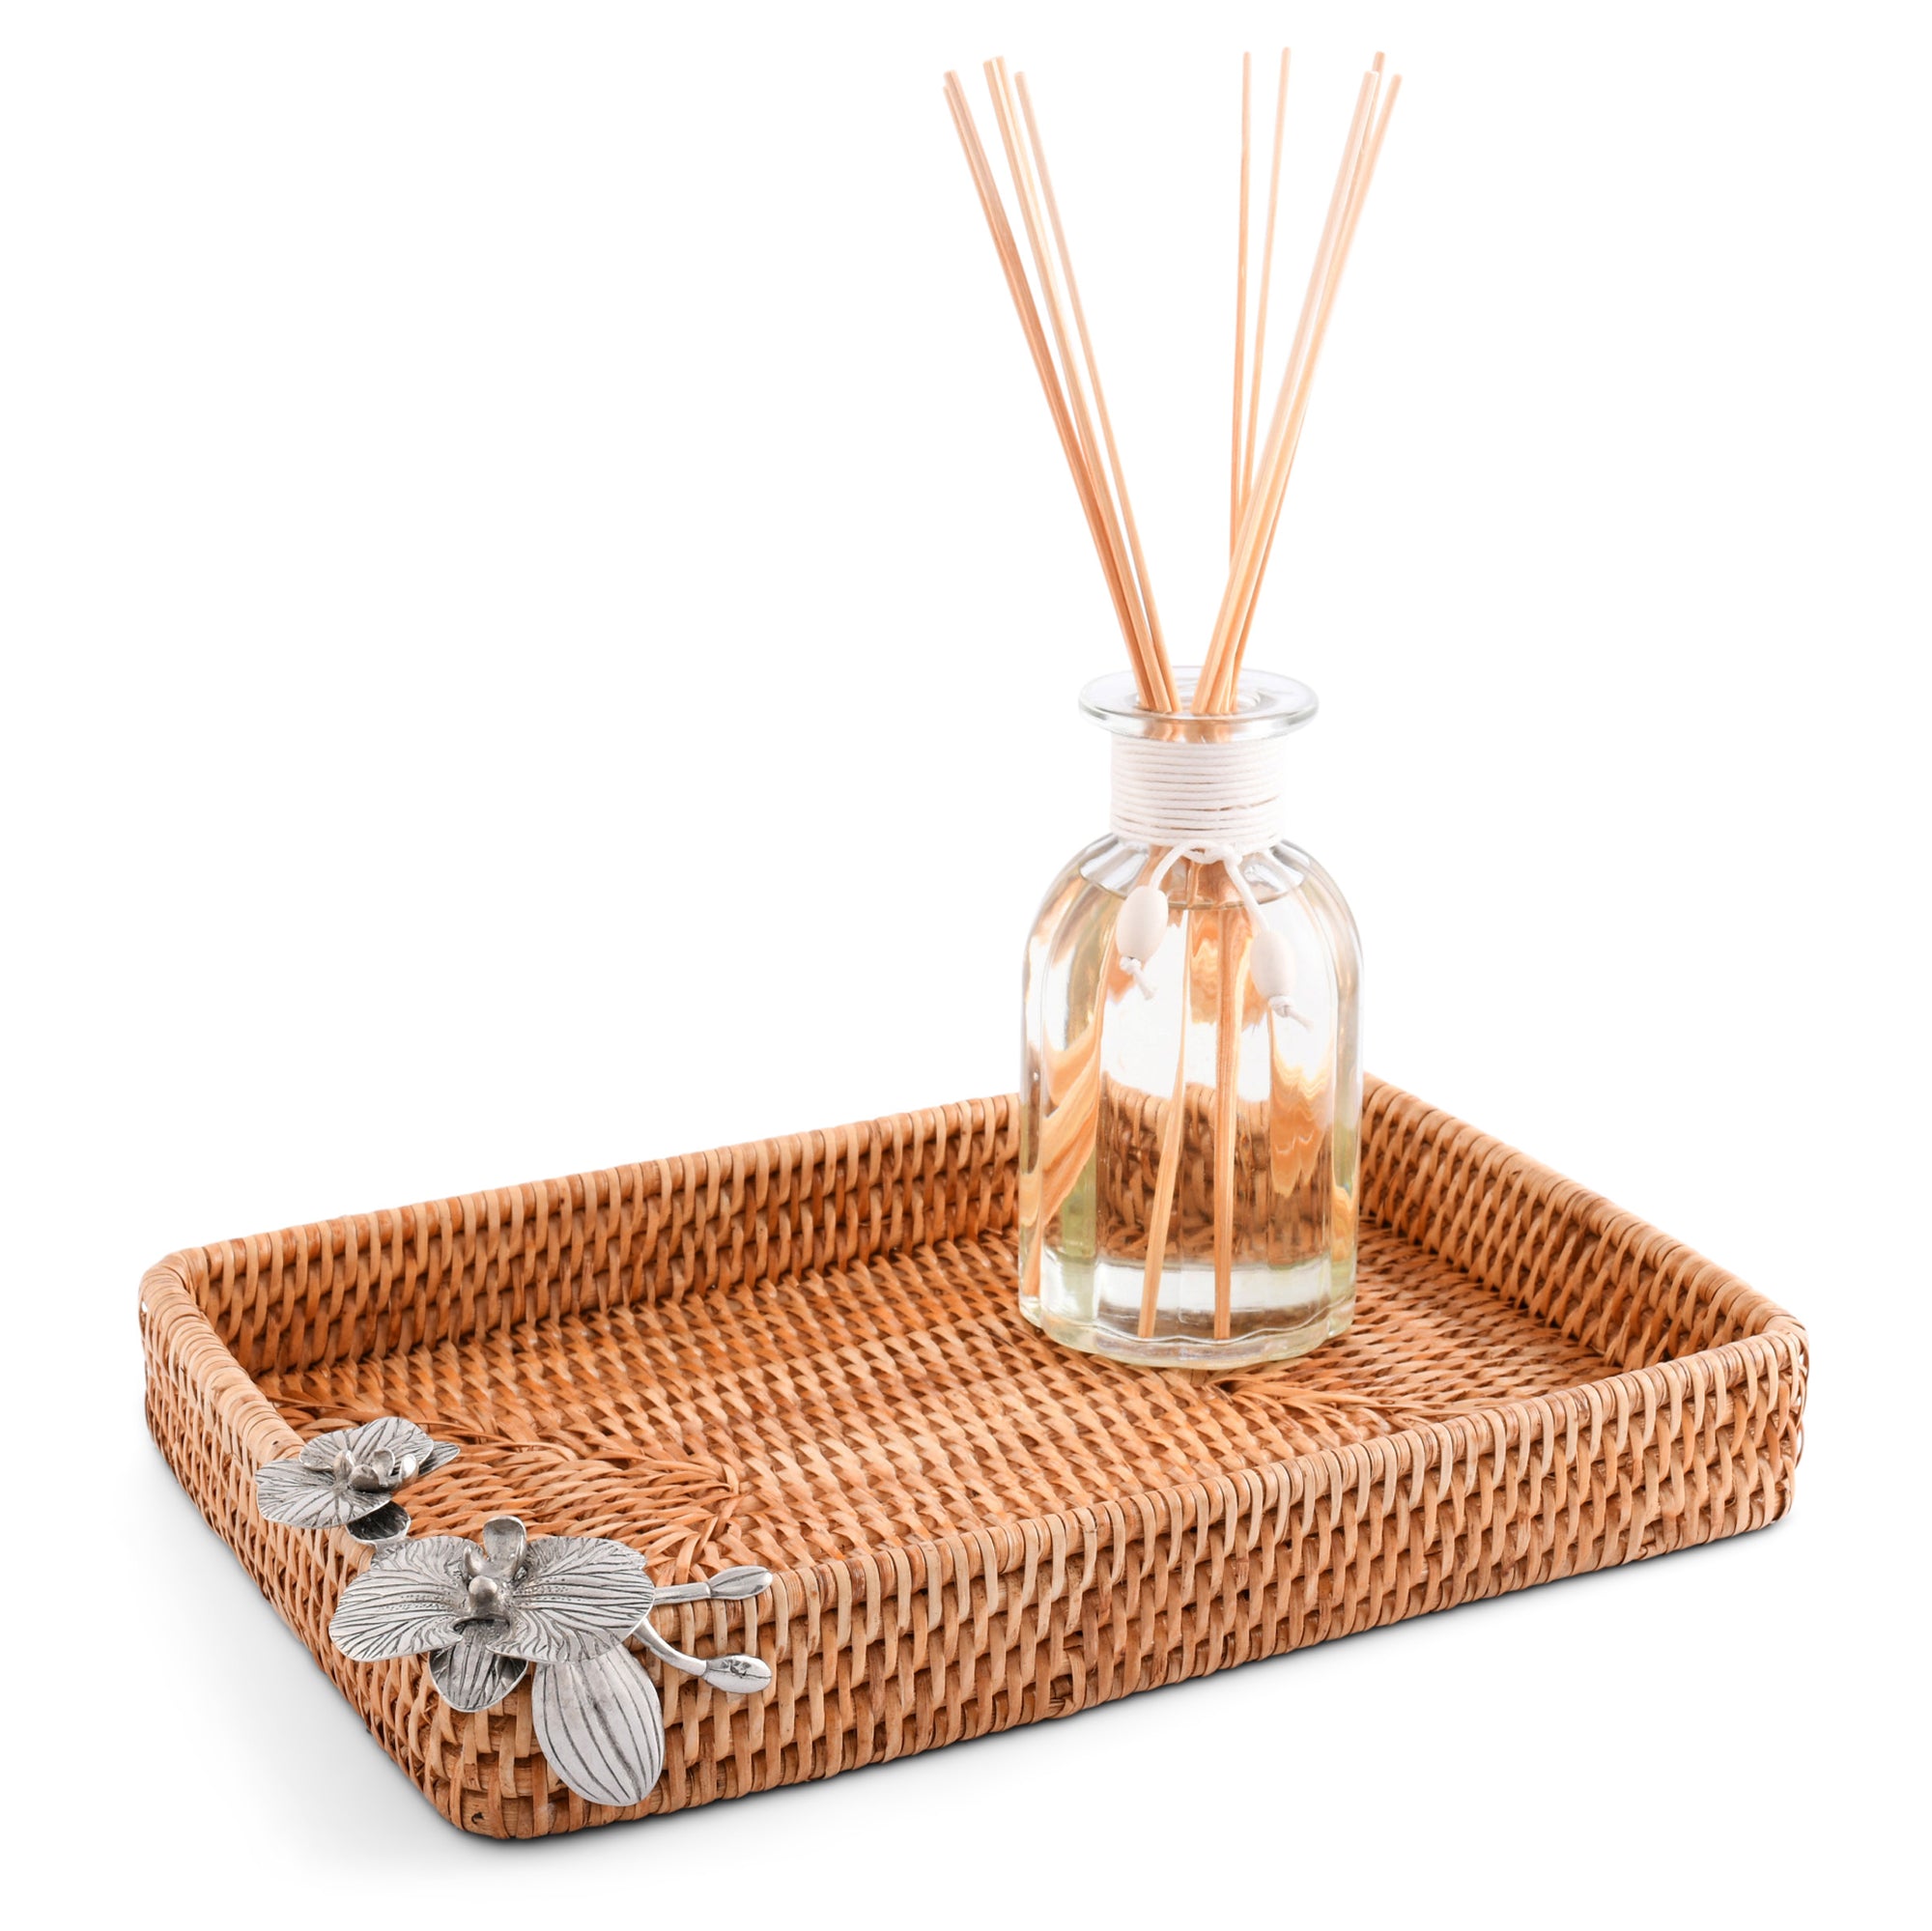 Vagabond House Orchid Catchall Tray Hand Woven Wicker Rattan Product Image